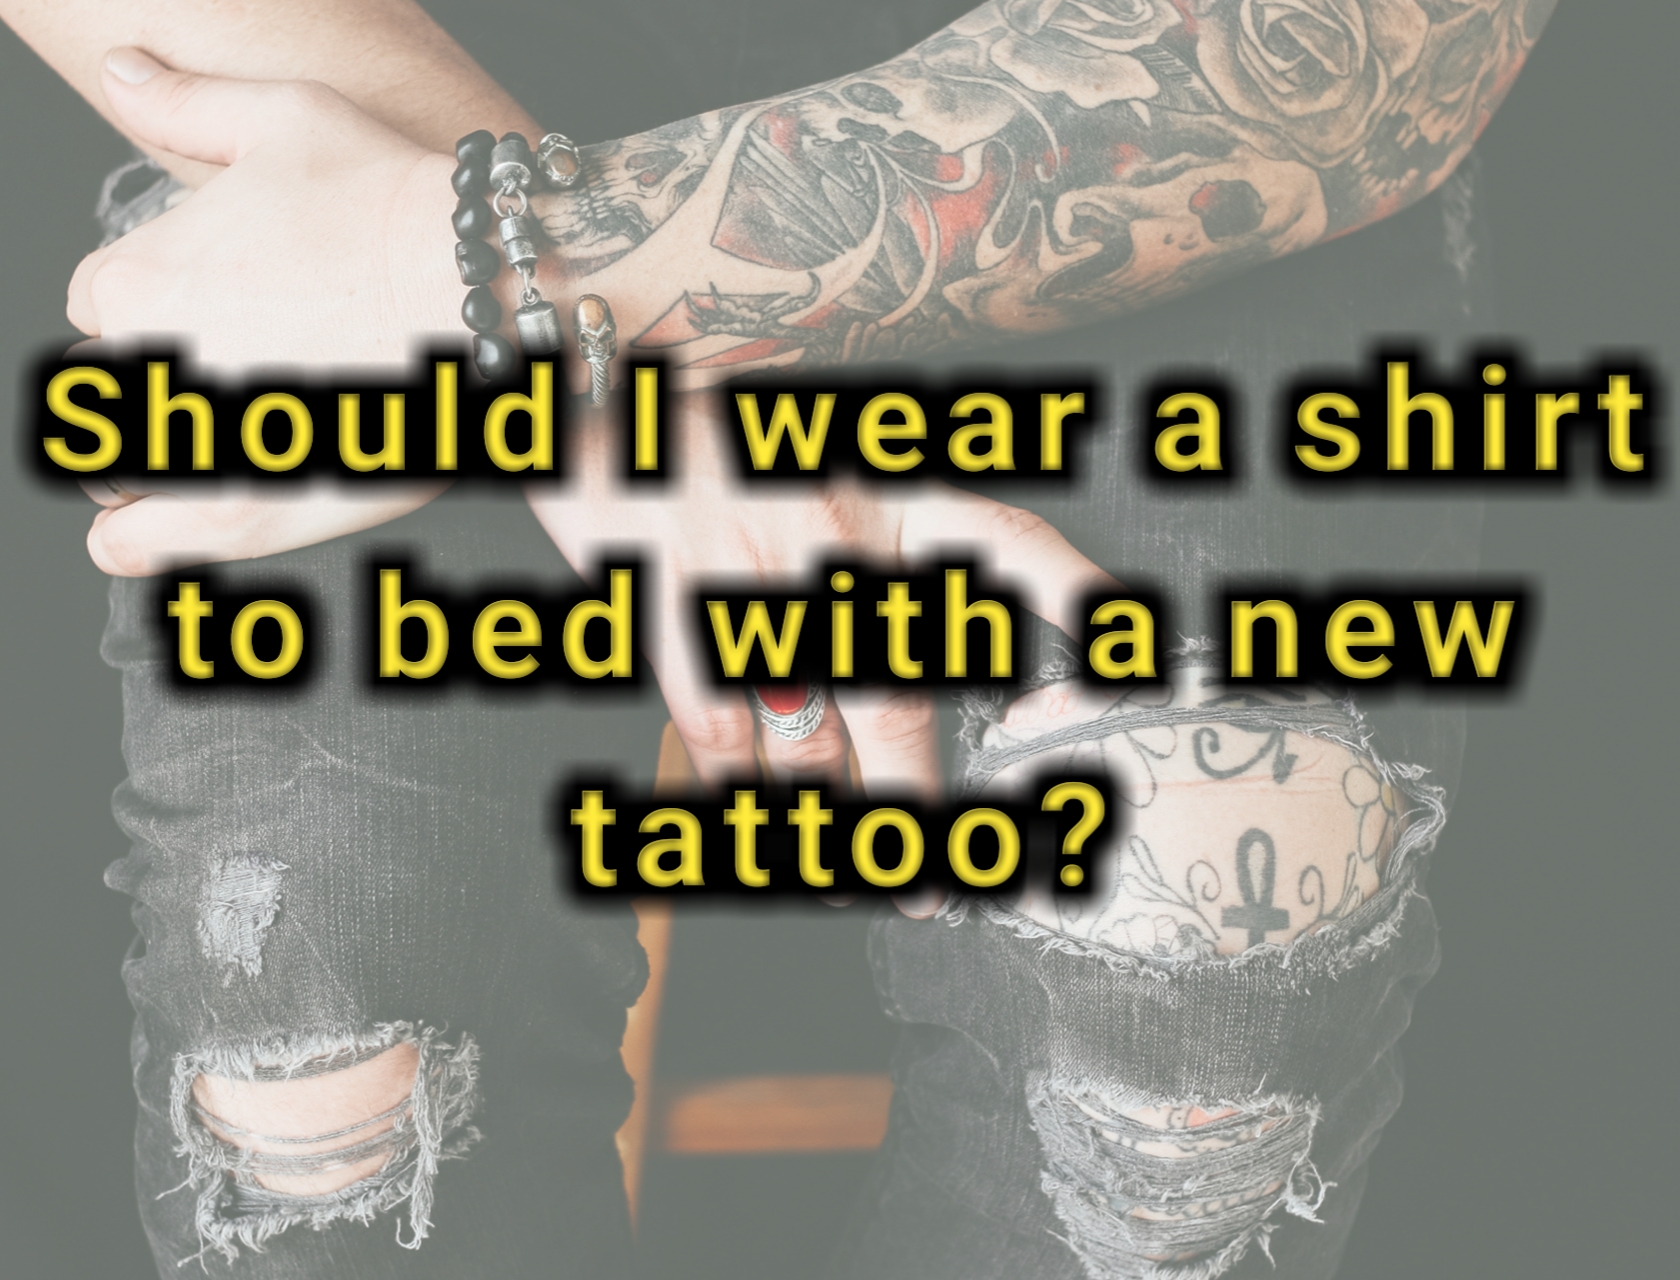 Should I wear a shirt to bed with a new tattoo